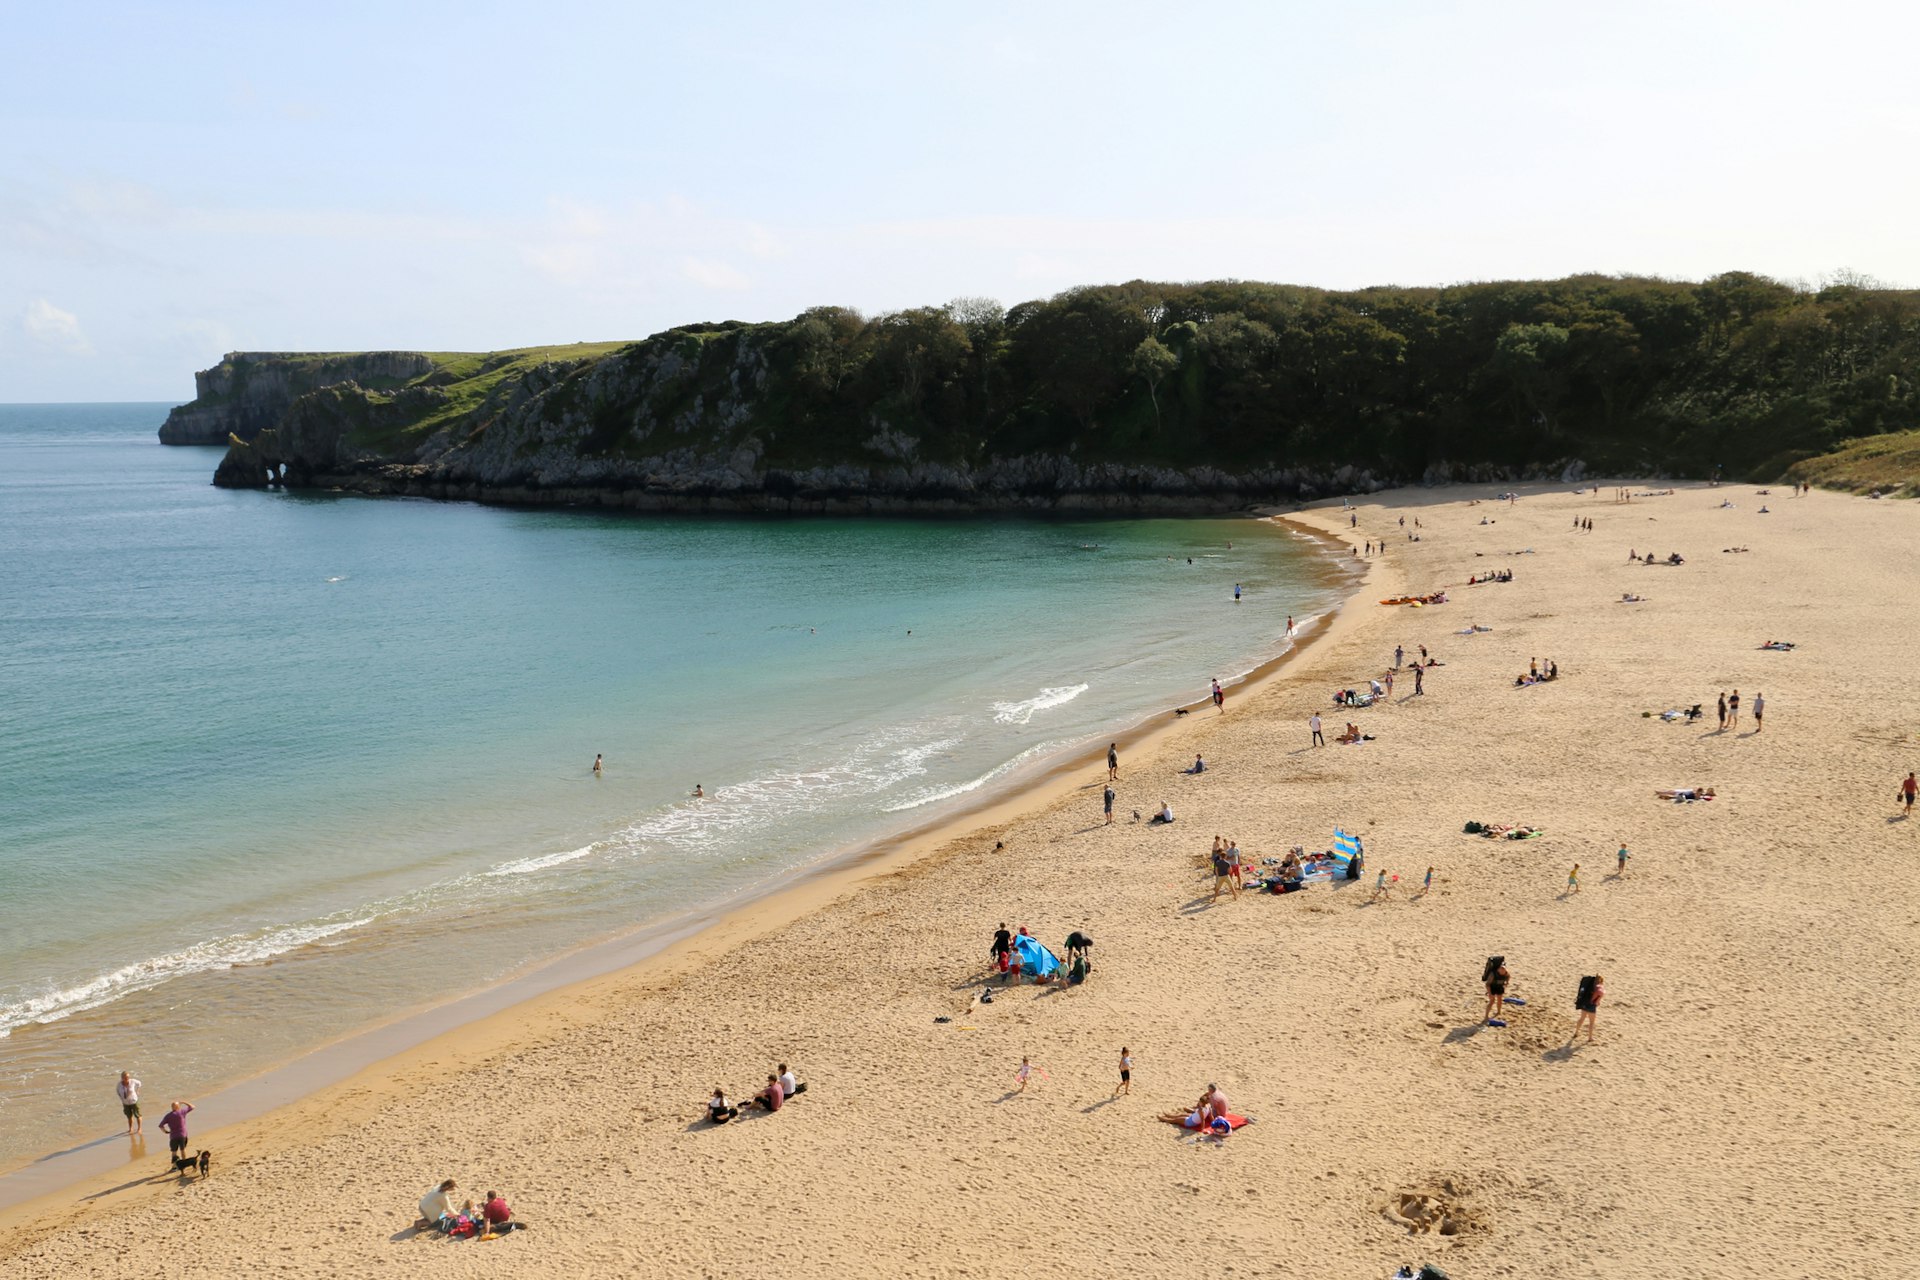 Swimmers at the beach at Barafundle Bay in Pembrokeshire in South Wales.